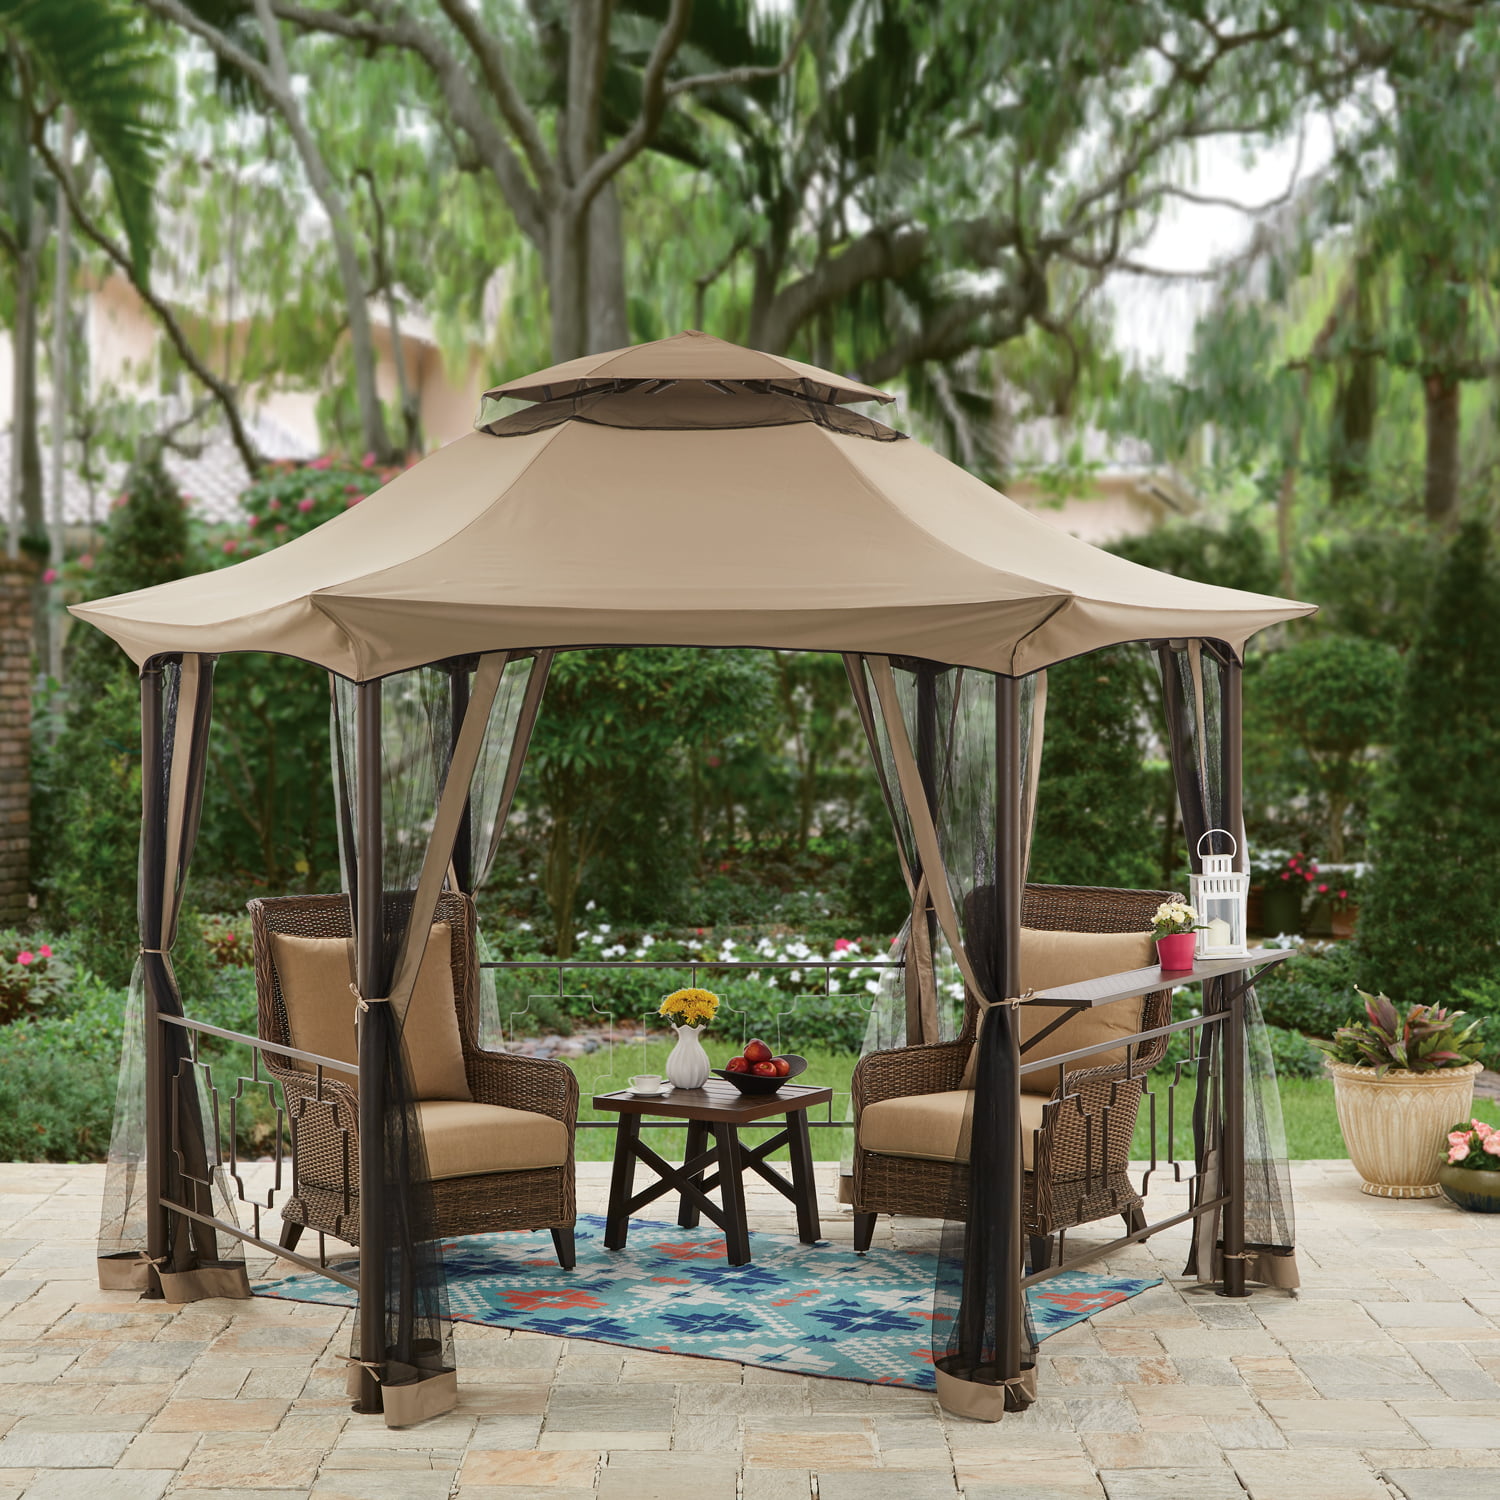 Better Homes Gardens Southern Pines 12 Hexagon Gazebo With